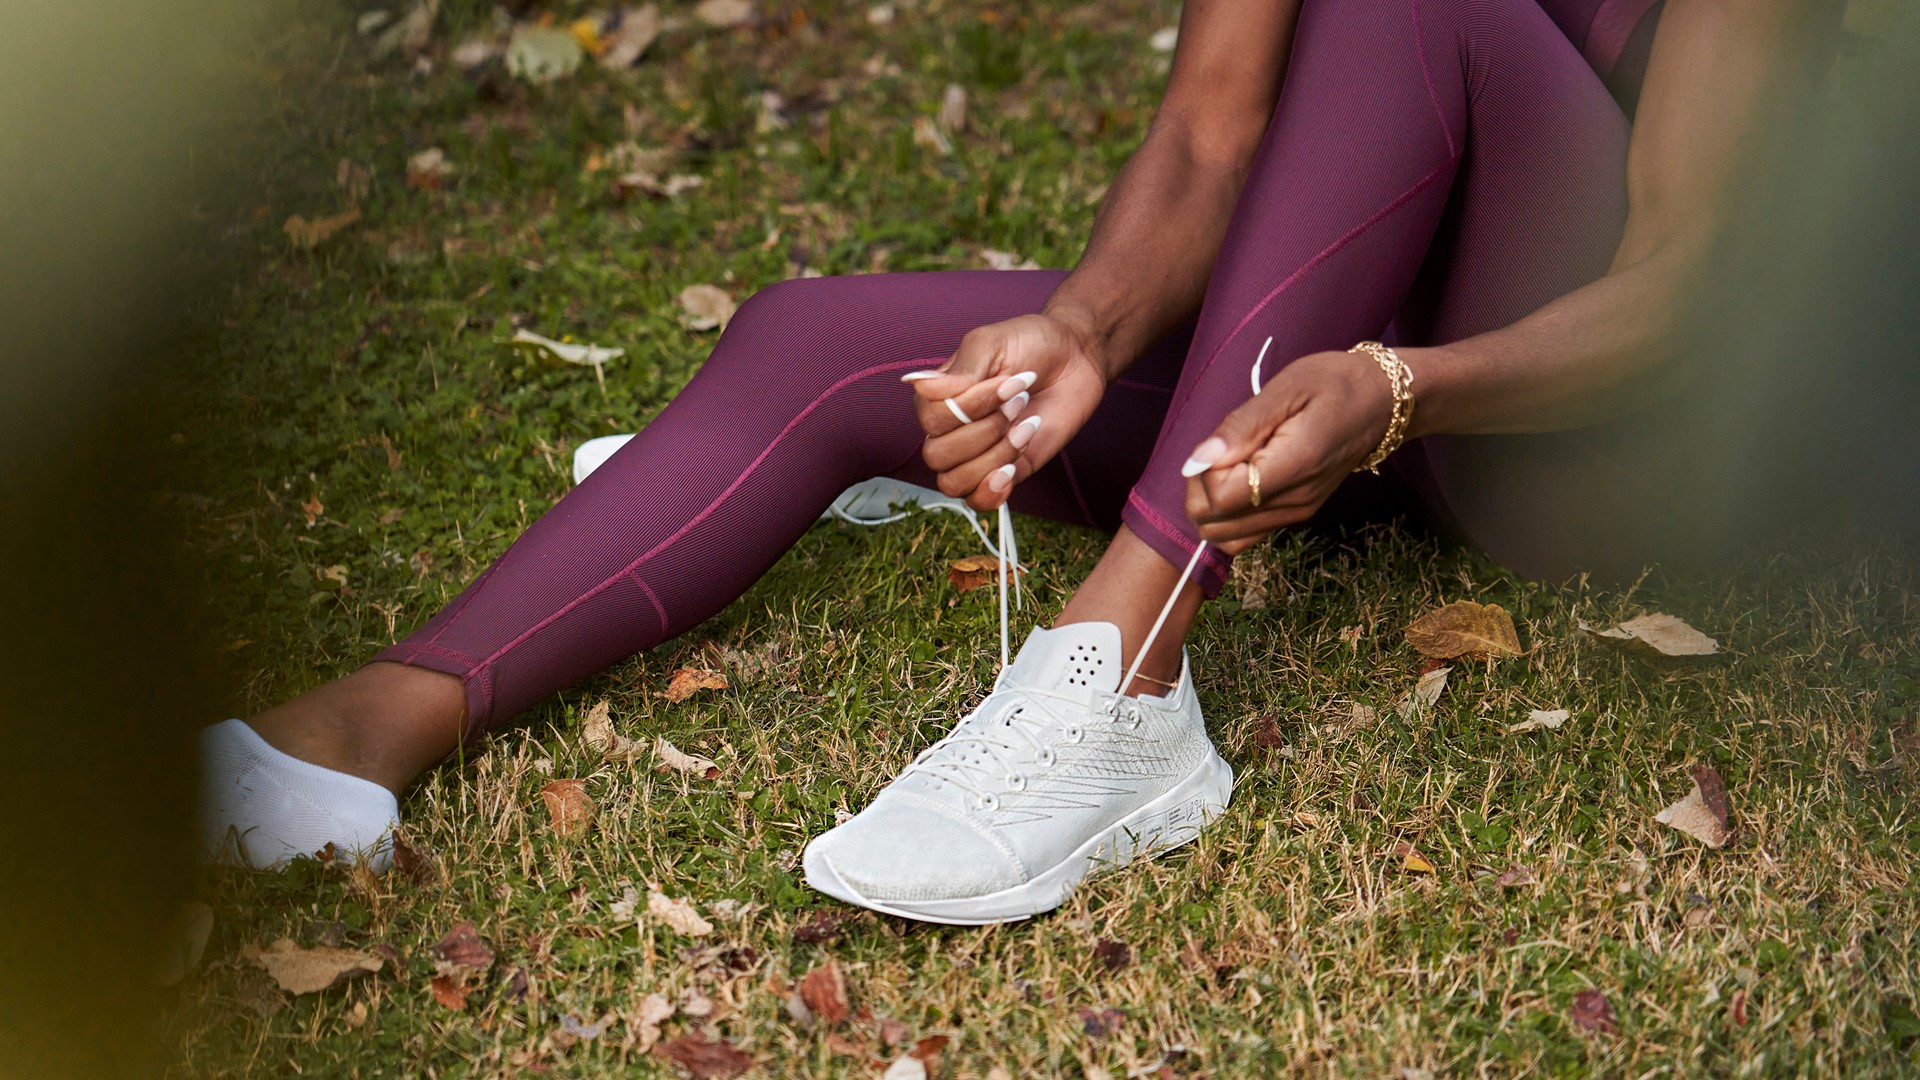 SCALING UP COLLABORATION TO FOOTPRINT ON THE SPORTSWEAR INDUSTRY WITH ALLBIRDS